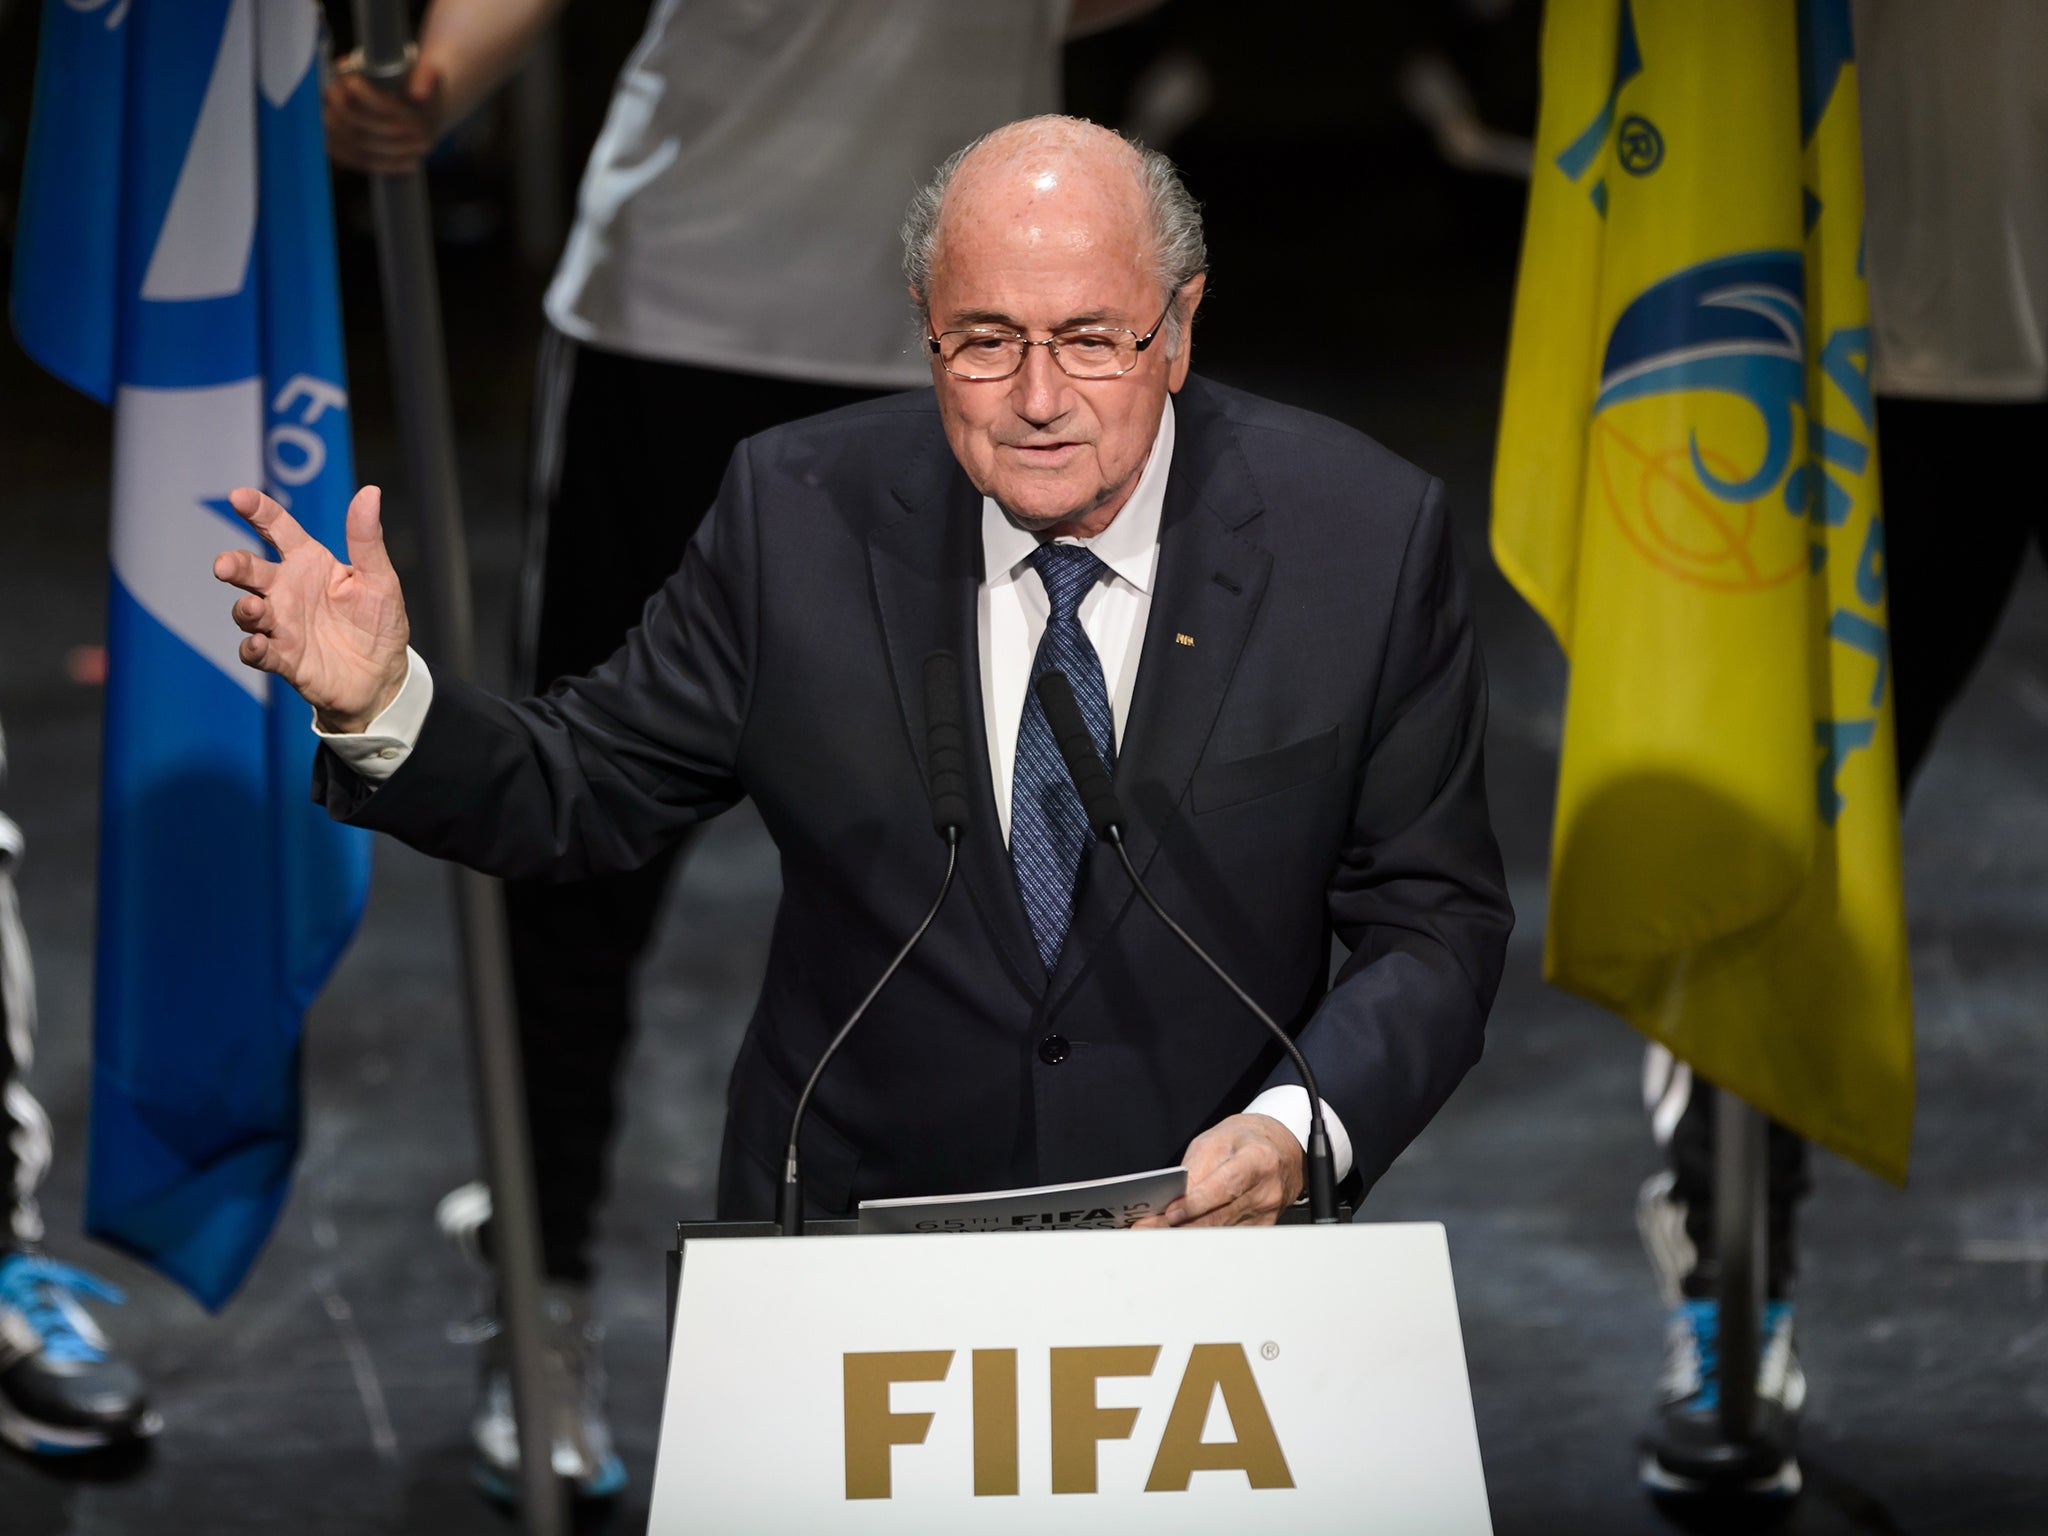 Fifa president Sepp Blatter speaks at the opening ceremony of the Fifa Congress